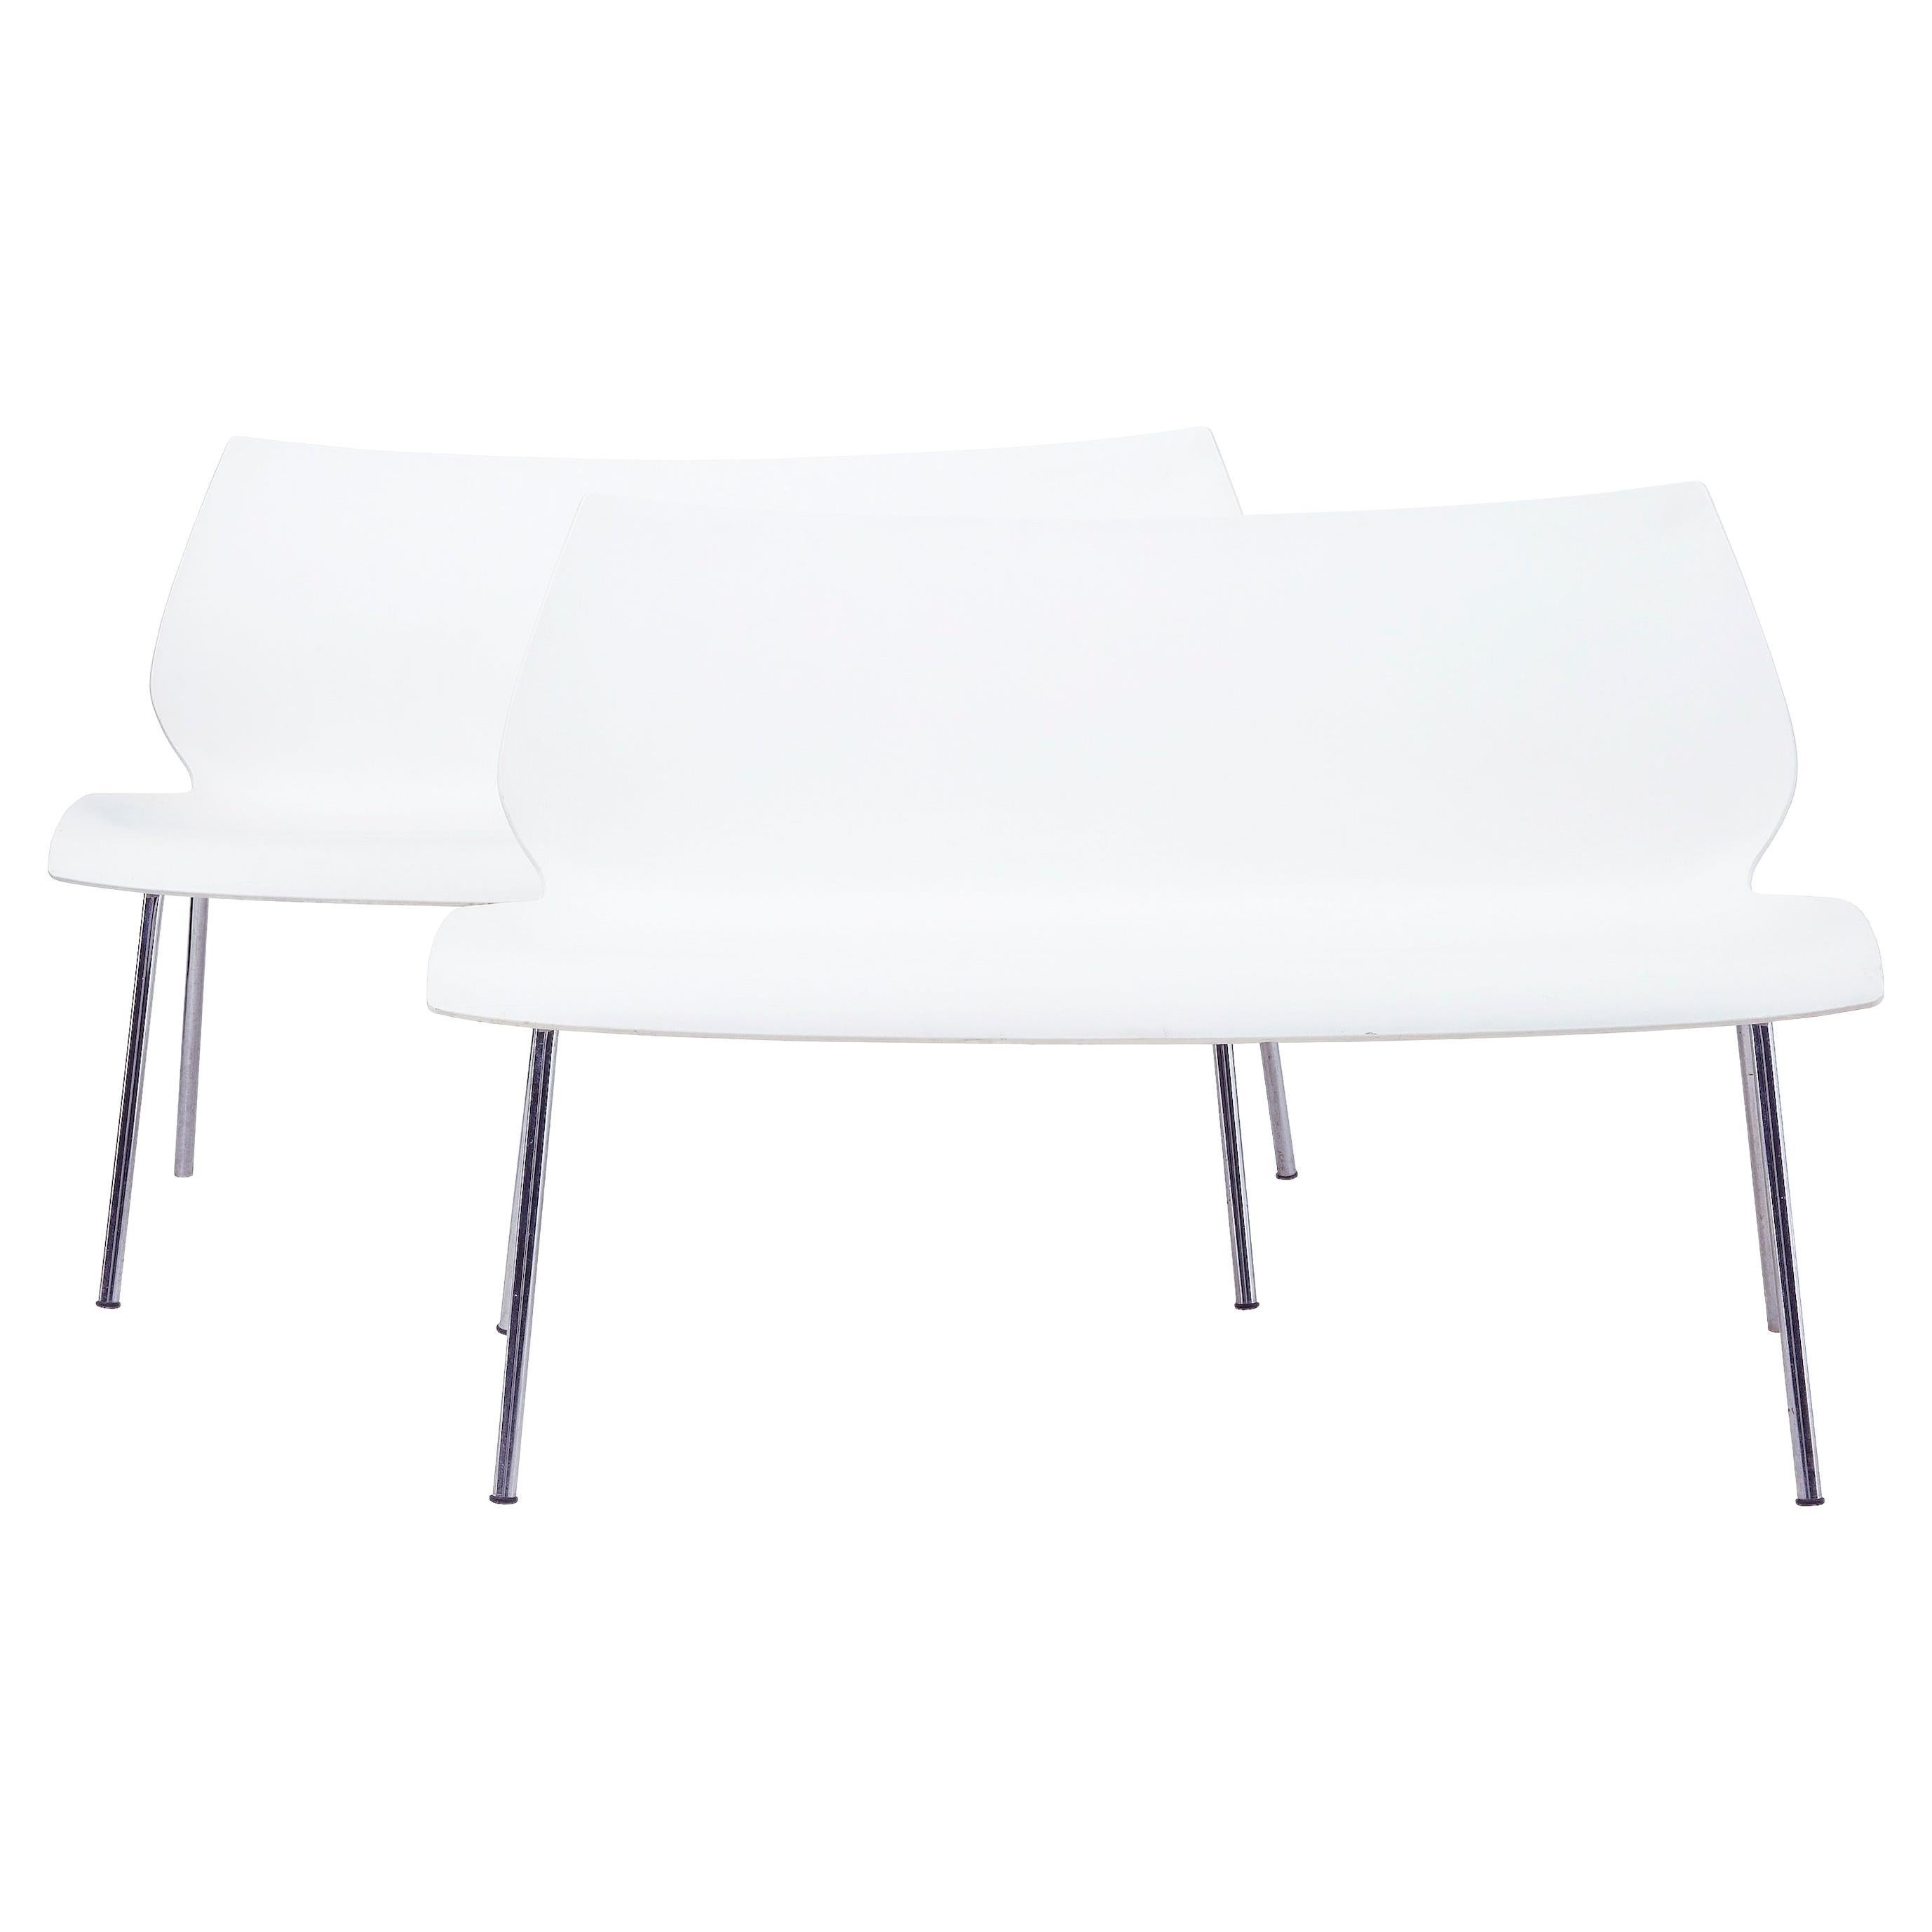 Pair of maui sofas by Vico Magistretti for Kartell